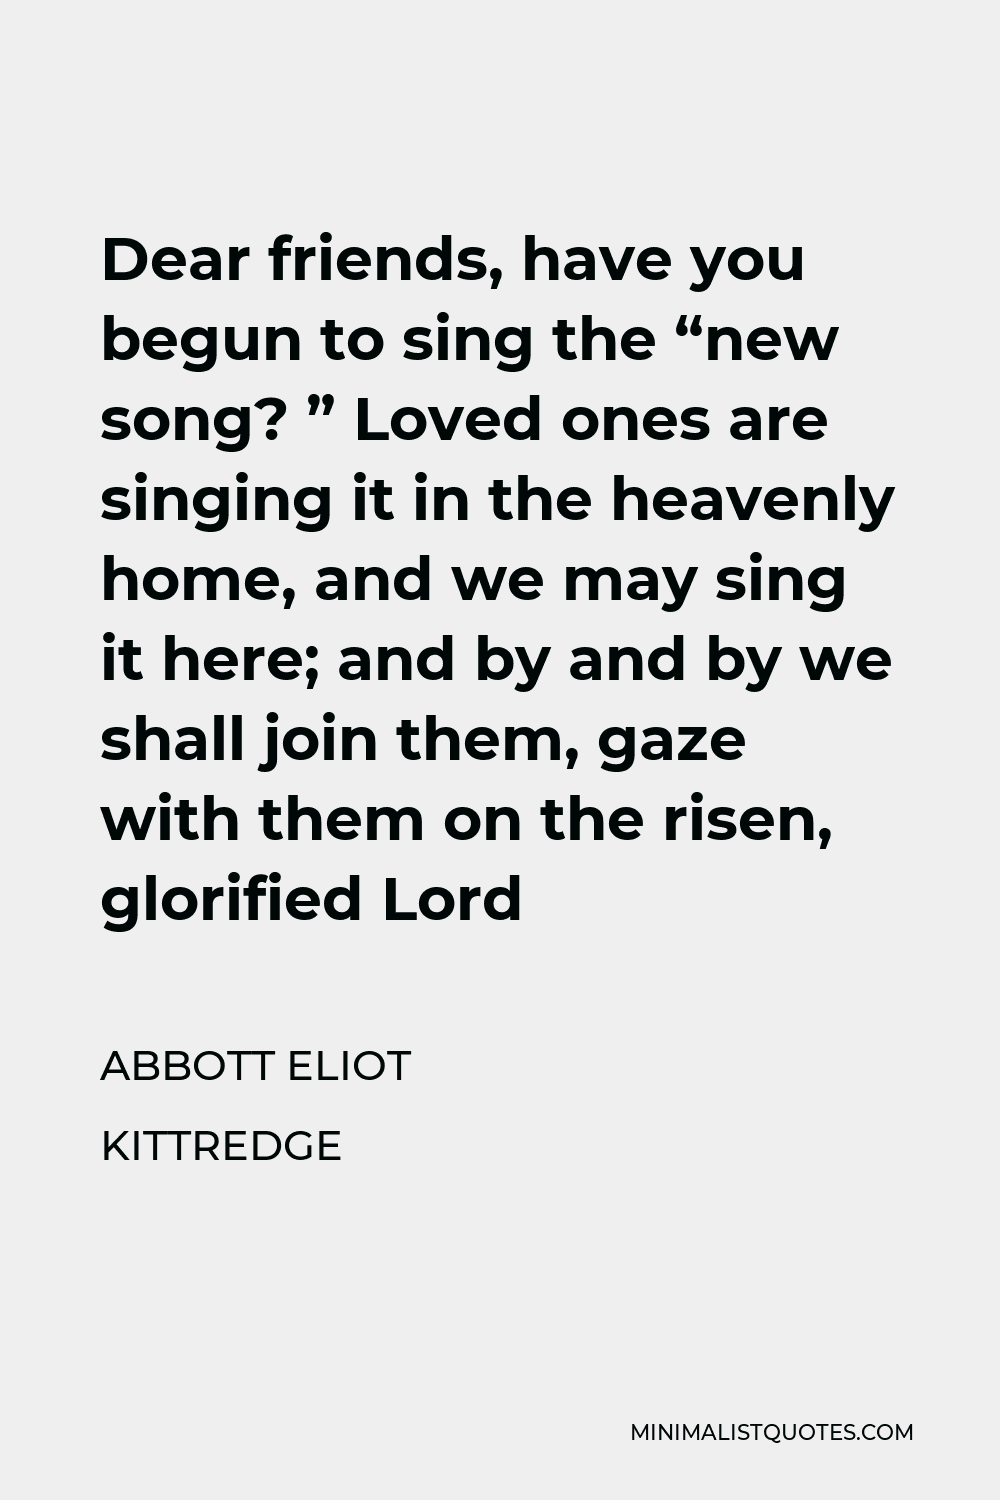 Abbott Eliot Kittredge Quote - Dear friends, have you begun to sing the “new song? ” Loved ones are singing it in the heavenly home, and we may sing it here; and by and by we shall join them, gaze with them on the risen, glorified Lord